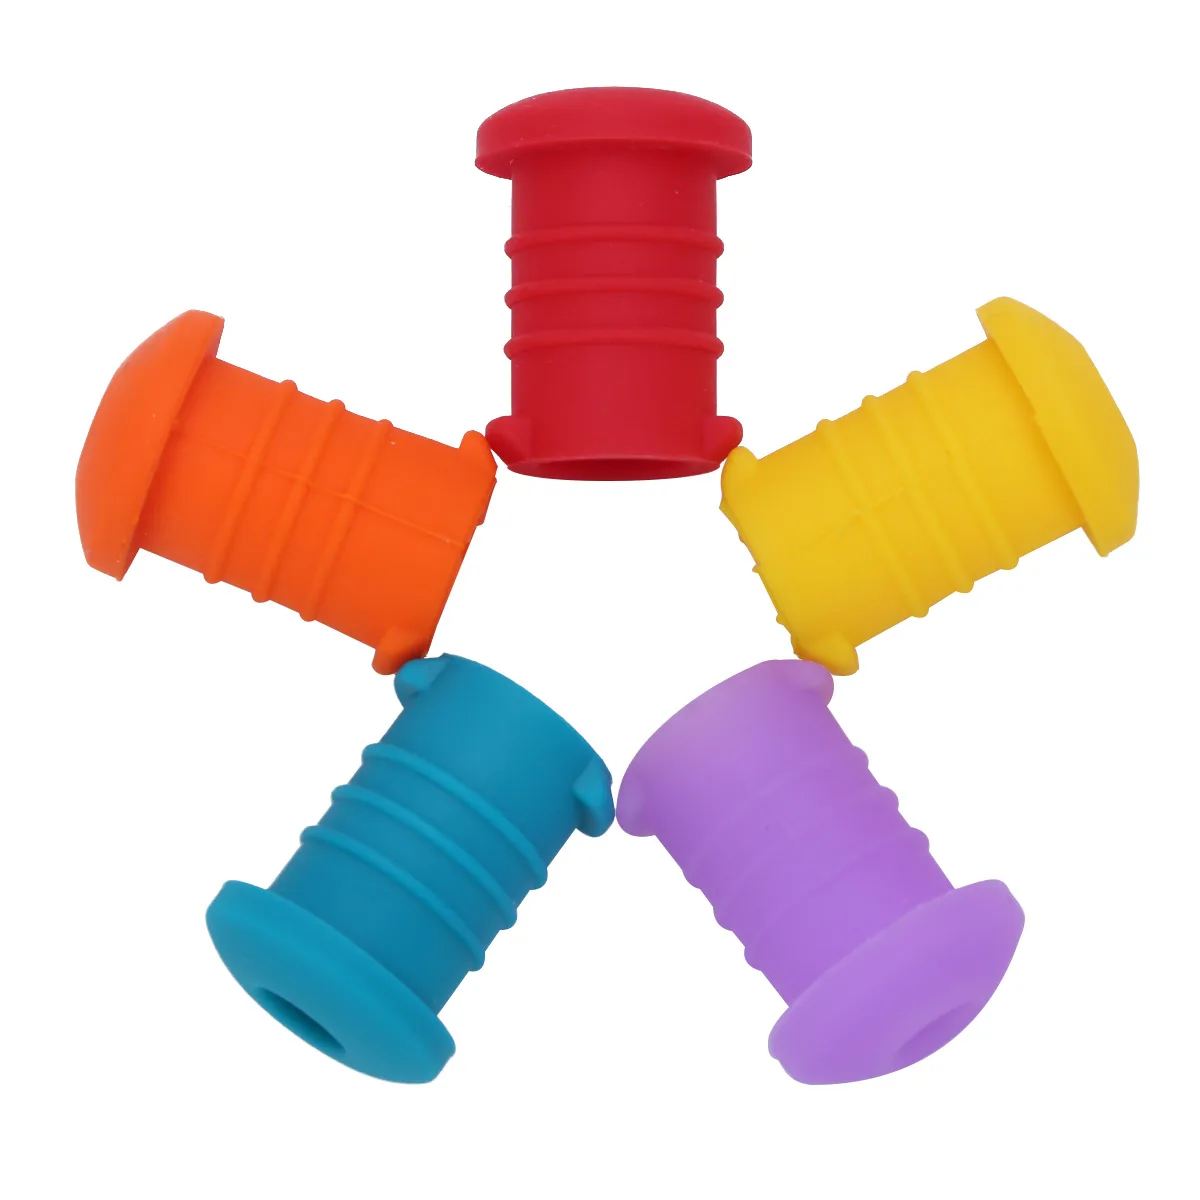 https://ae01.alicdn.com/kf/H0e3aeaad0df640fe8ea31ec0a55f21b8V/5Pcs-Silicone-Rubber-Leak-Proof-Seals-Stoppers-Plugs-Replacement-Gaskets-for-Sports-Water-Bottles-Covers-Lids.jpg